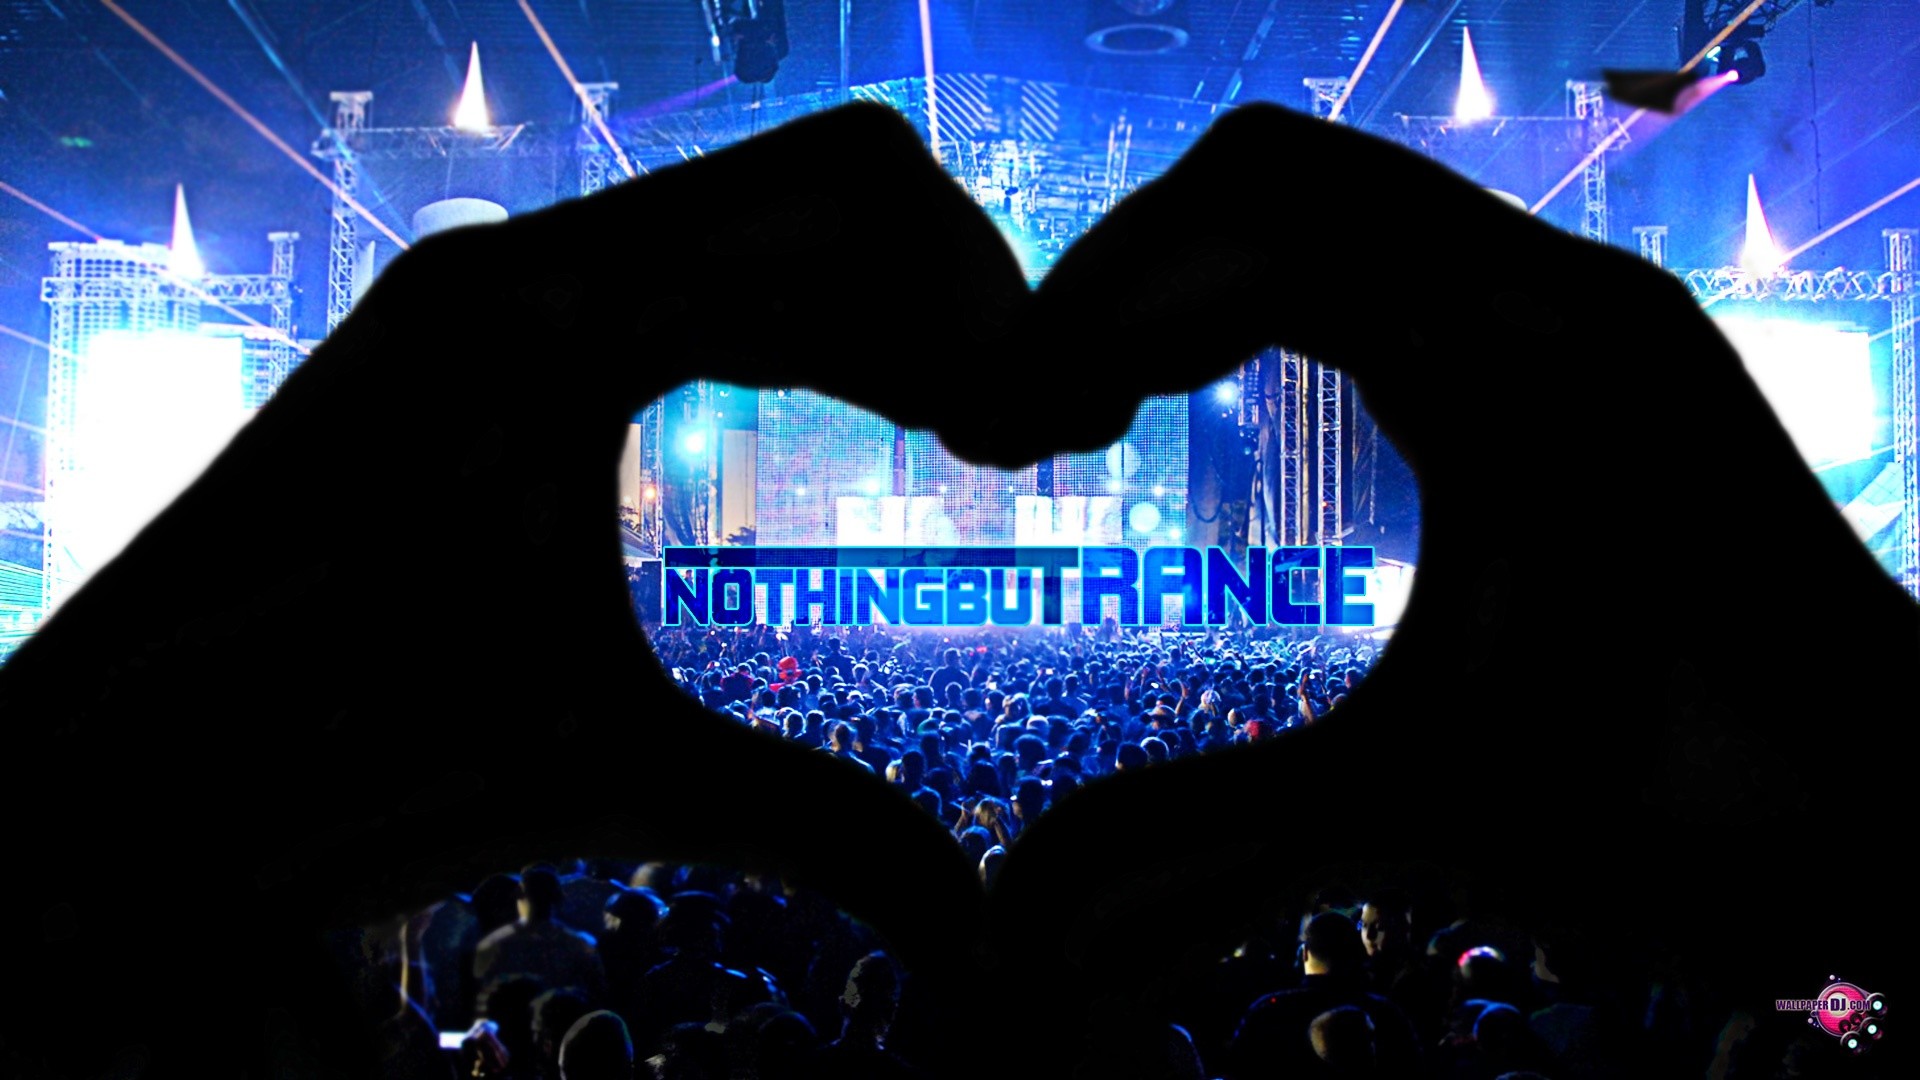 1920x1080 Showing Nothing But Trance at resolution , Nothing But Trance hand shaped  like a heart focusing on the dj desktop hd wallpaper music wallpapers